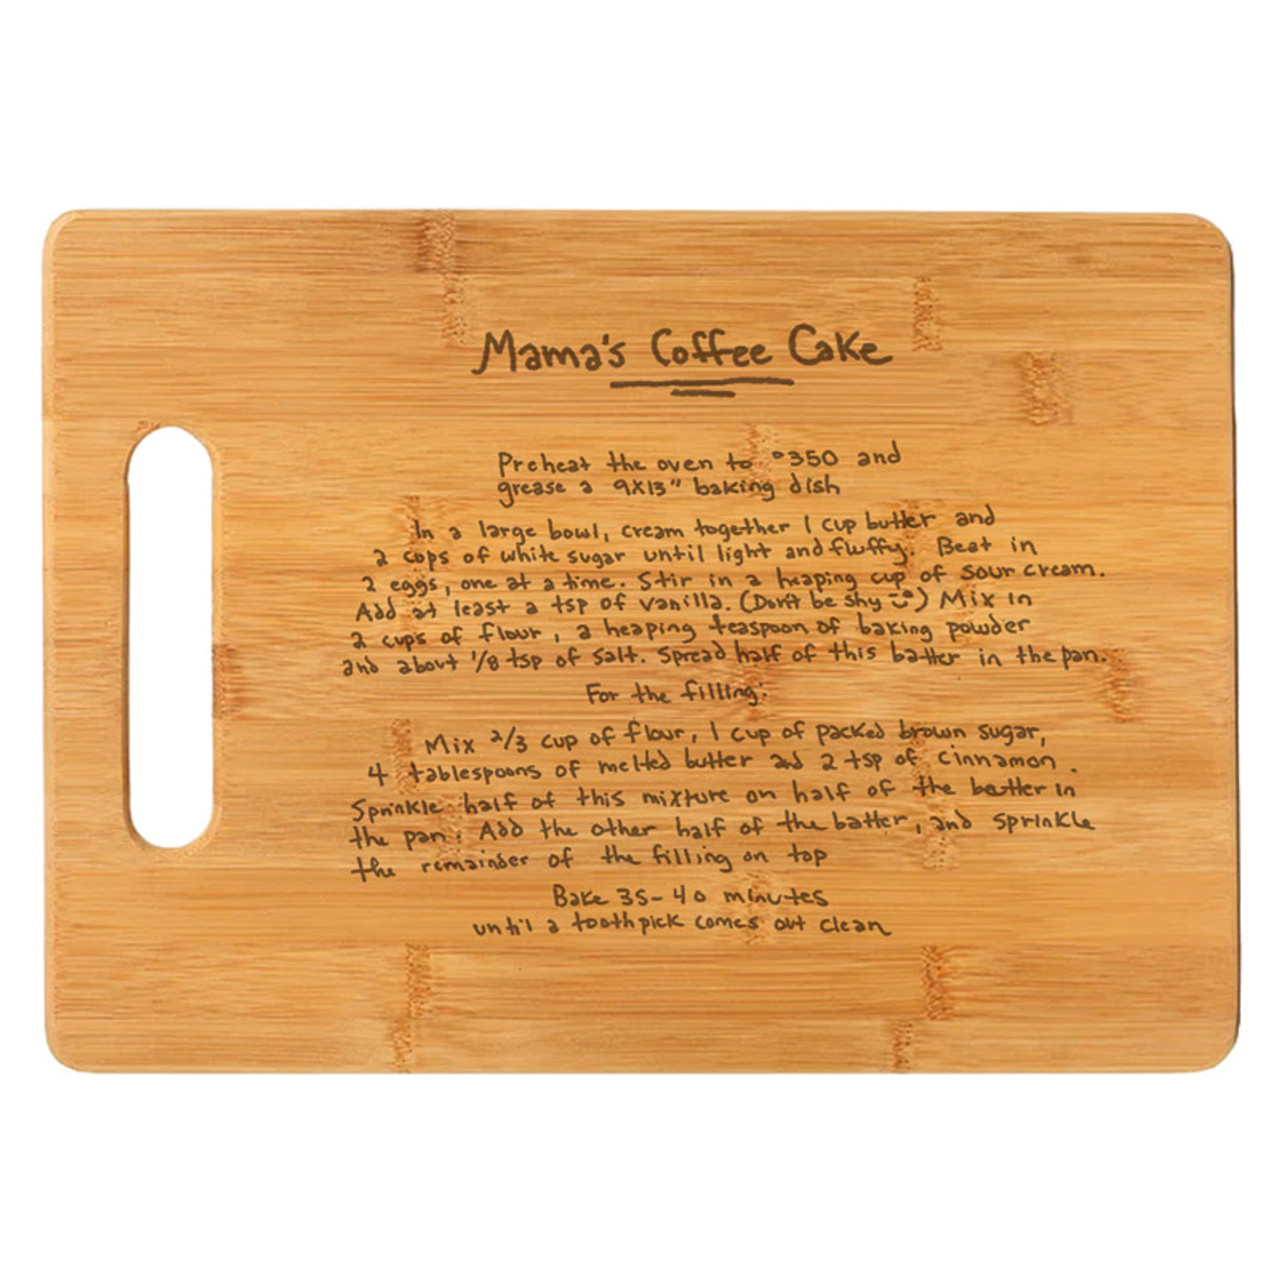 Better Together Personalized Custom Wooden Cutting Board